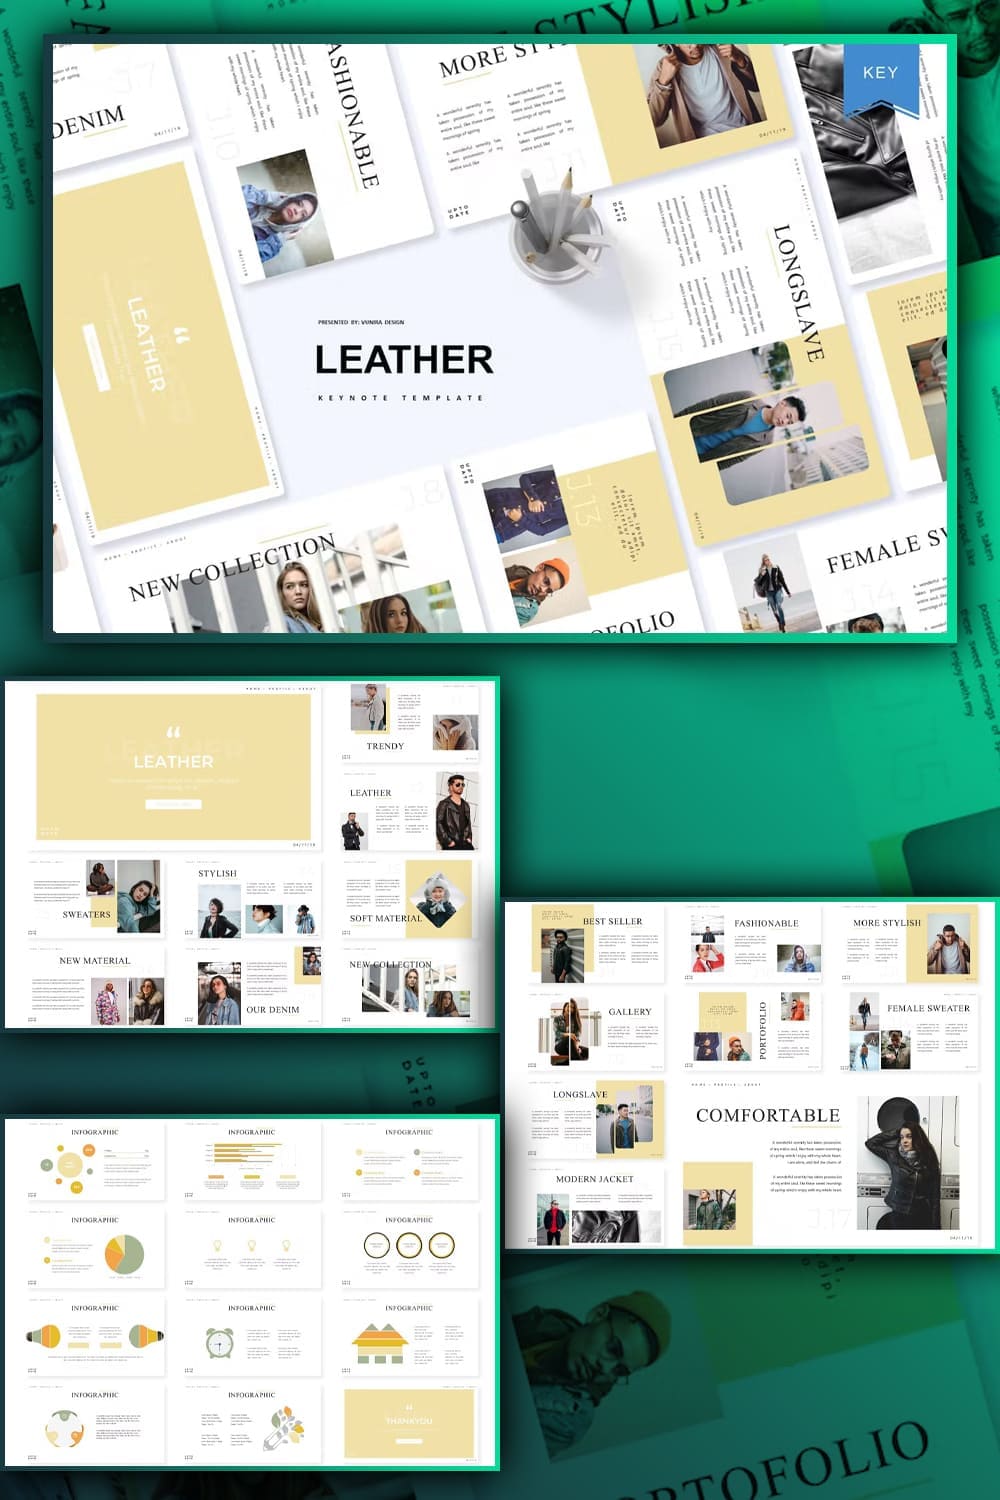 Leather keynote template, image for pinterest 1000x1500.